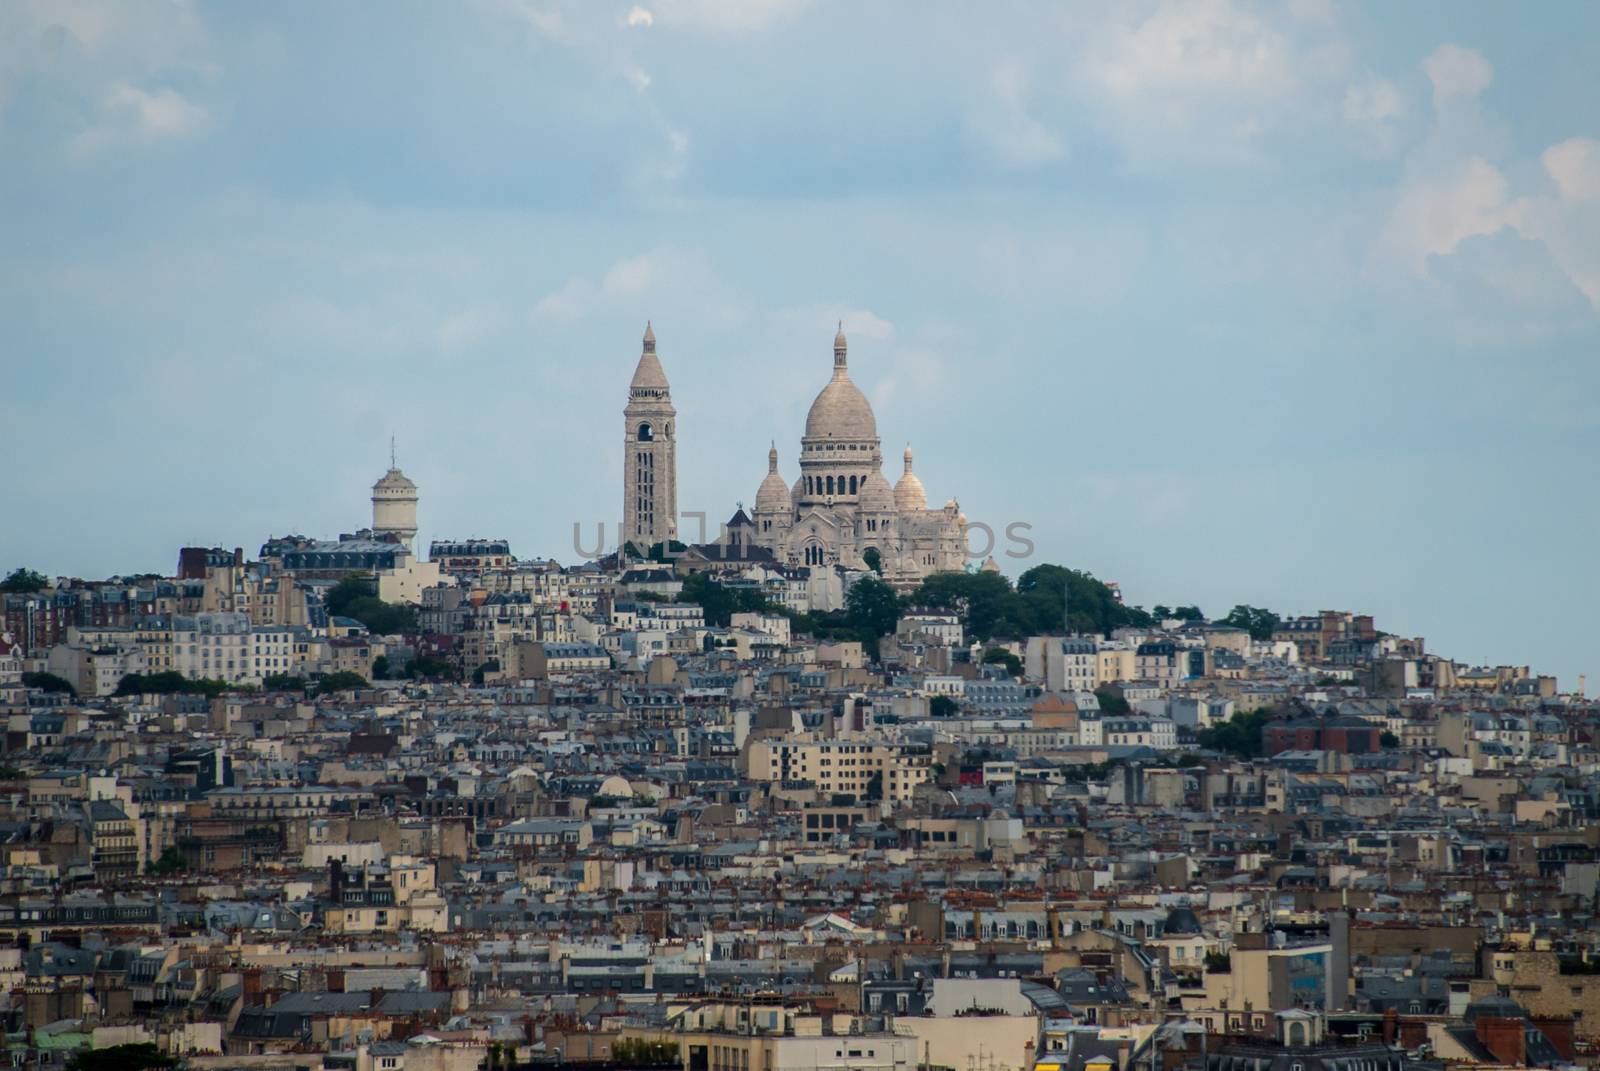 Town of Paris around Sacre Coeur on top of the hill by MXW_Stock